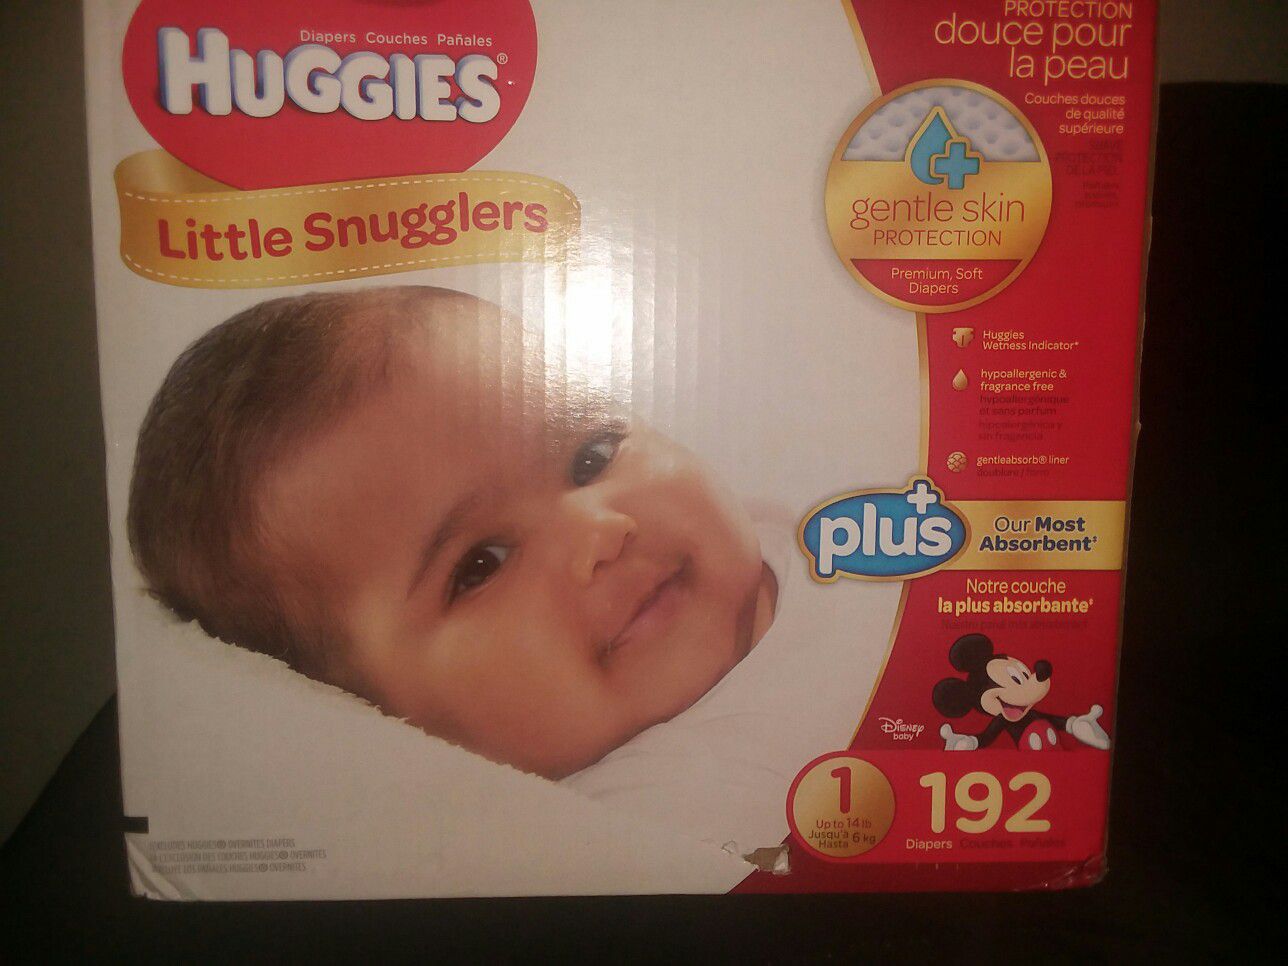 Box Of Huggies Diapers. 1 Pack Was Used But Their To Small For My Son Now. There's 128 Instead Of 192